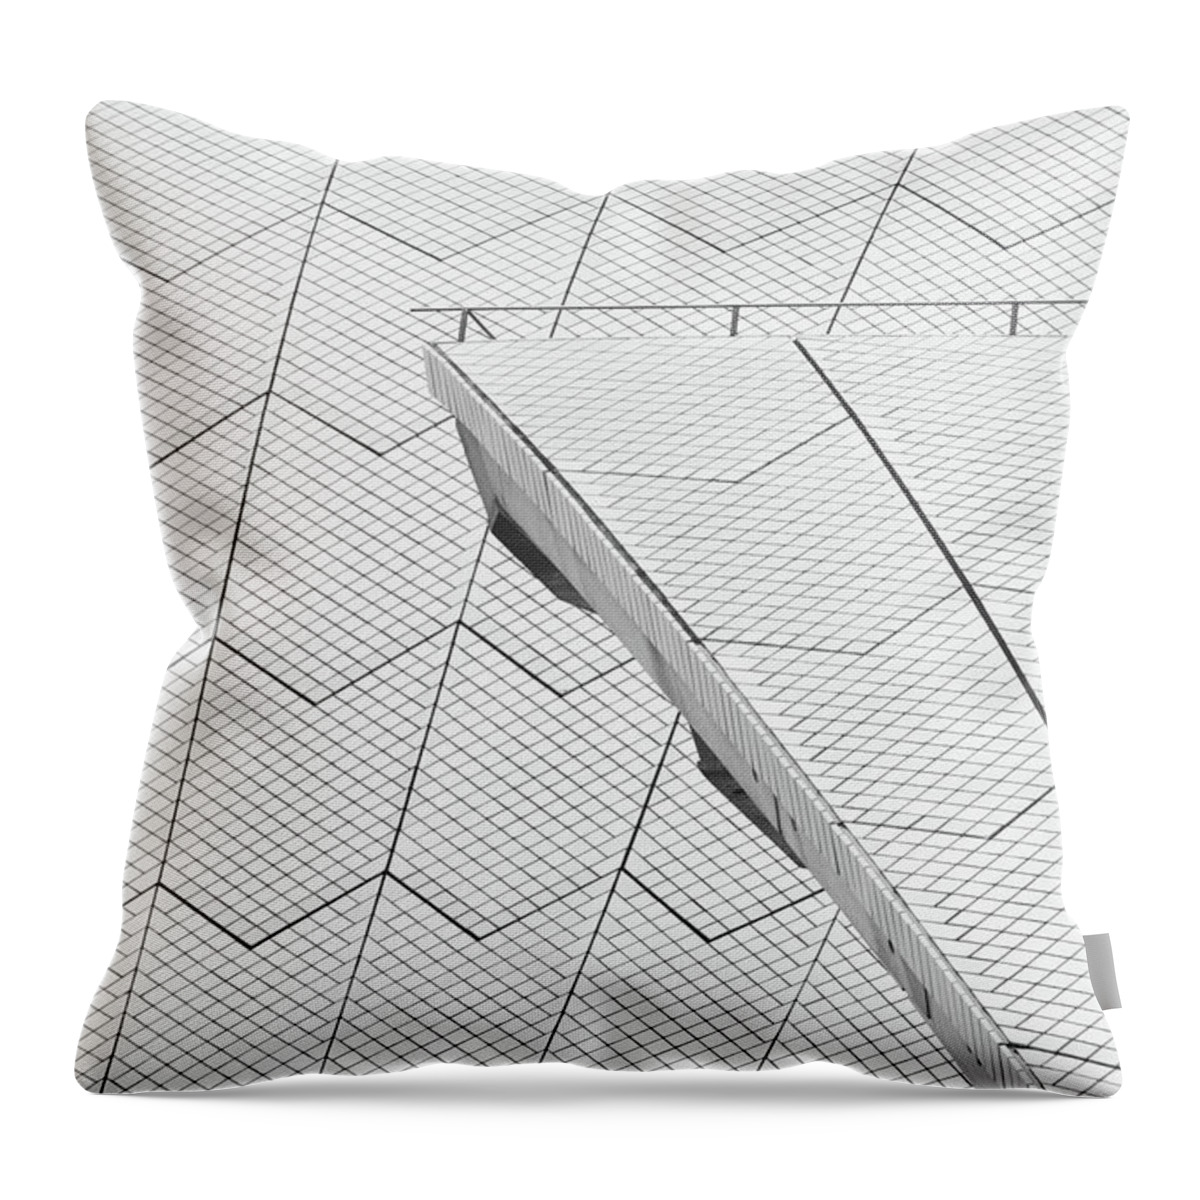 Sydney Throw Pillow featuring the photograph Sydney Opera House Roof No. 10-1 by Sandy Taylor